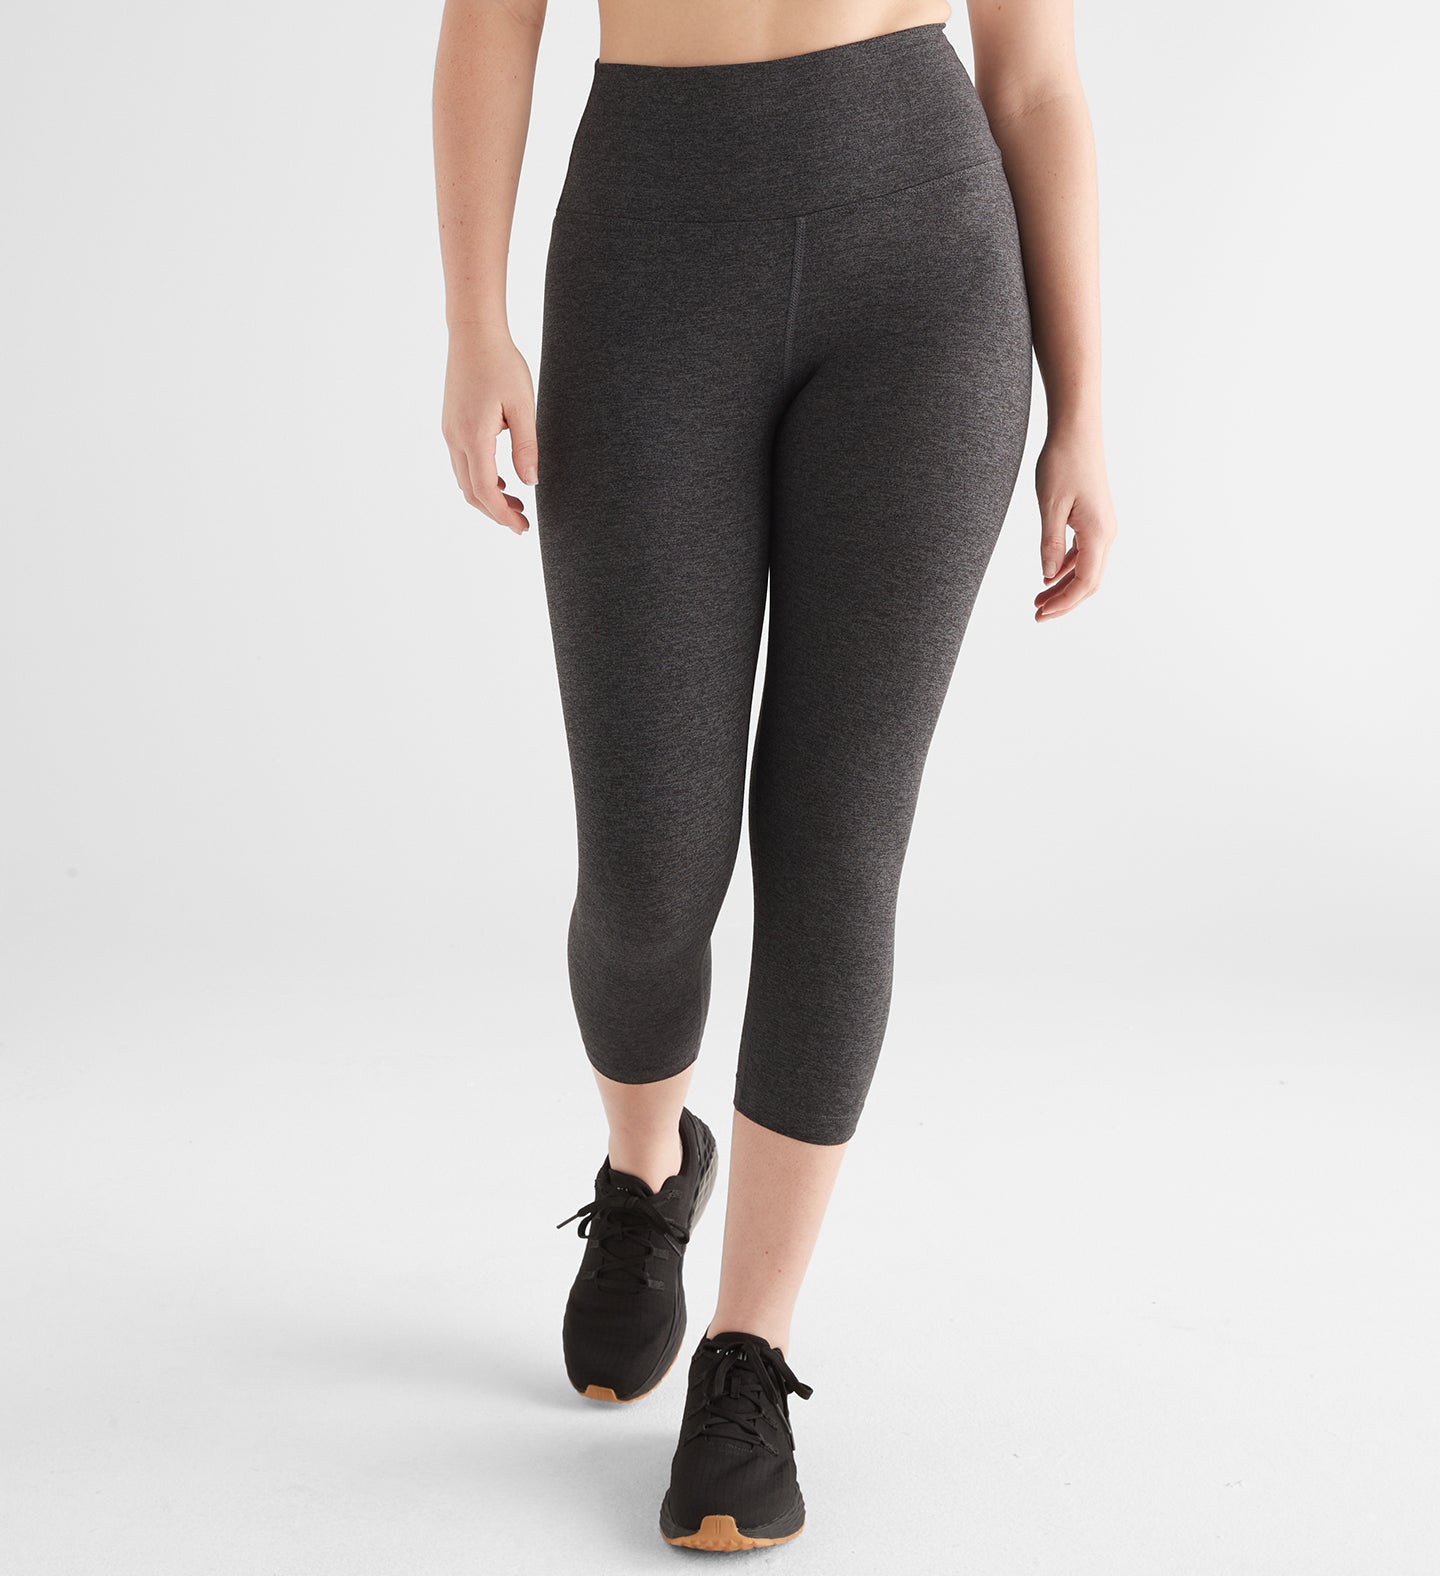 Women's Hip Lifting Exercise Pants Show Thin and Tight, High Waist and Small  Feet Capris Yoga Sportwear Pants - China Sport Wear and Gym price